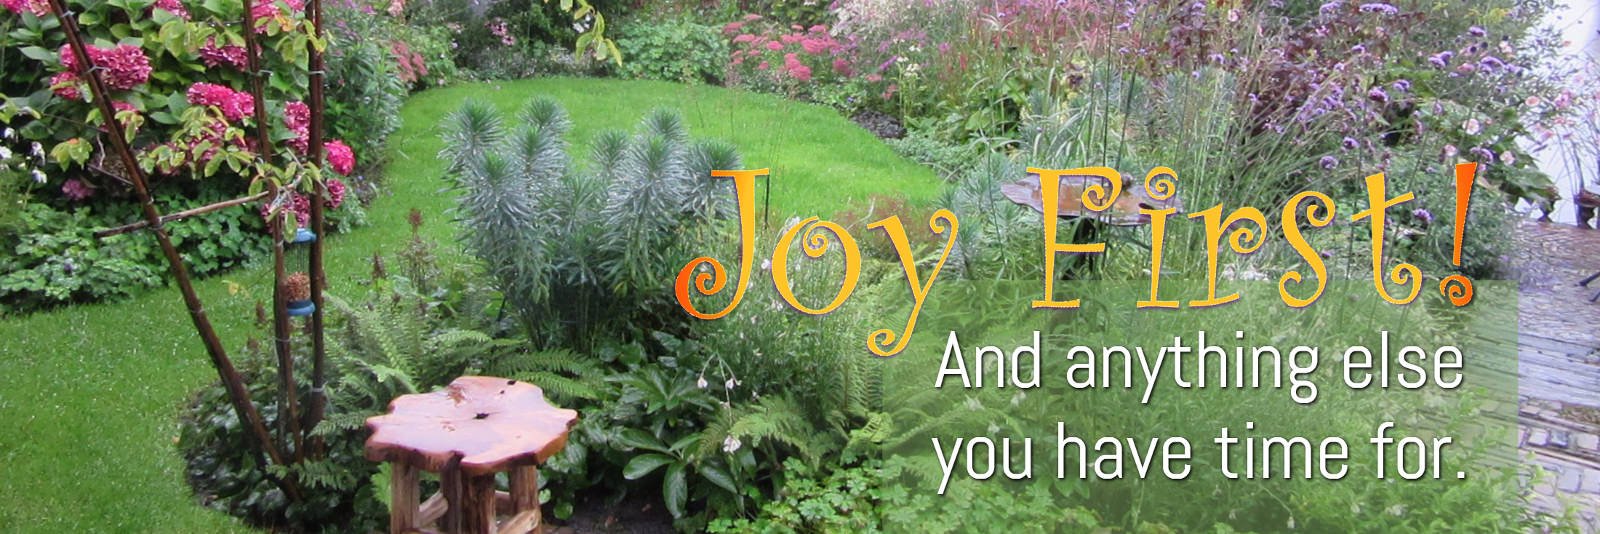 Elles' Garden - Joy First. And anything else you have time for.